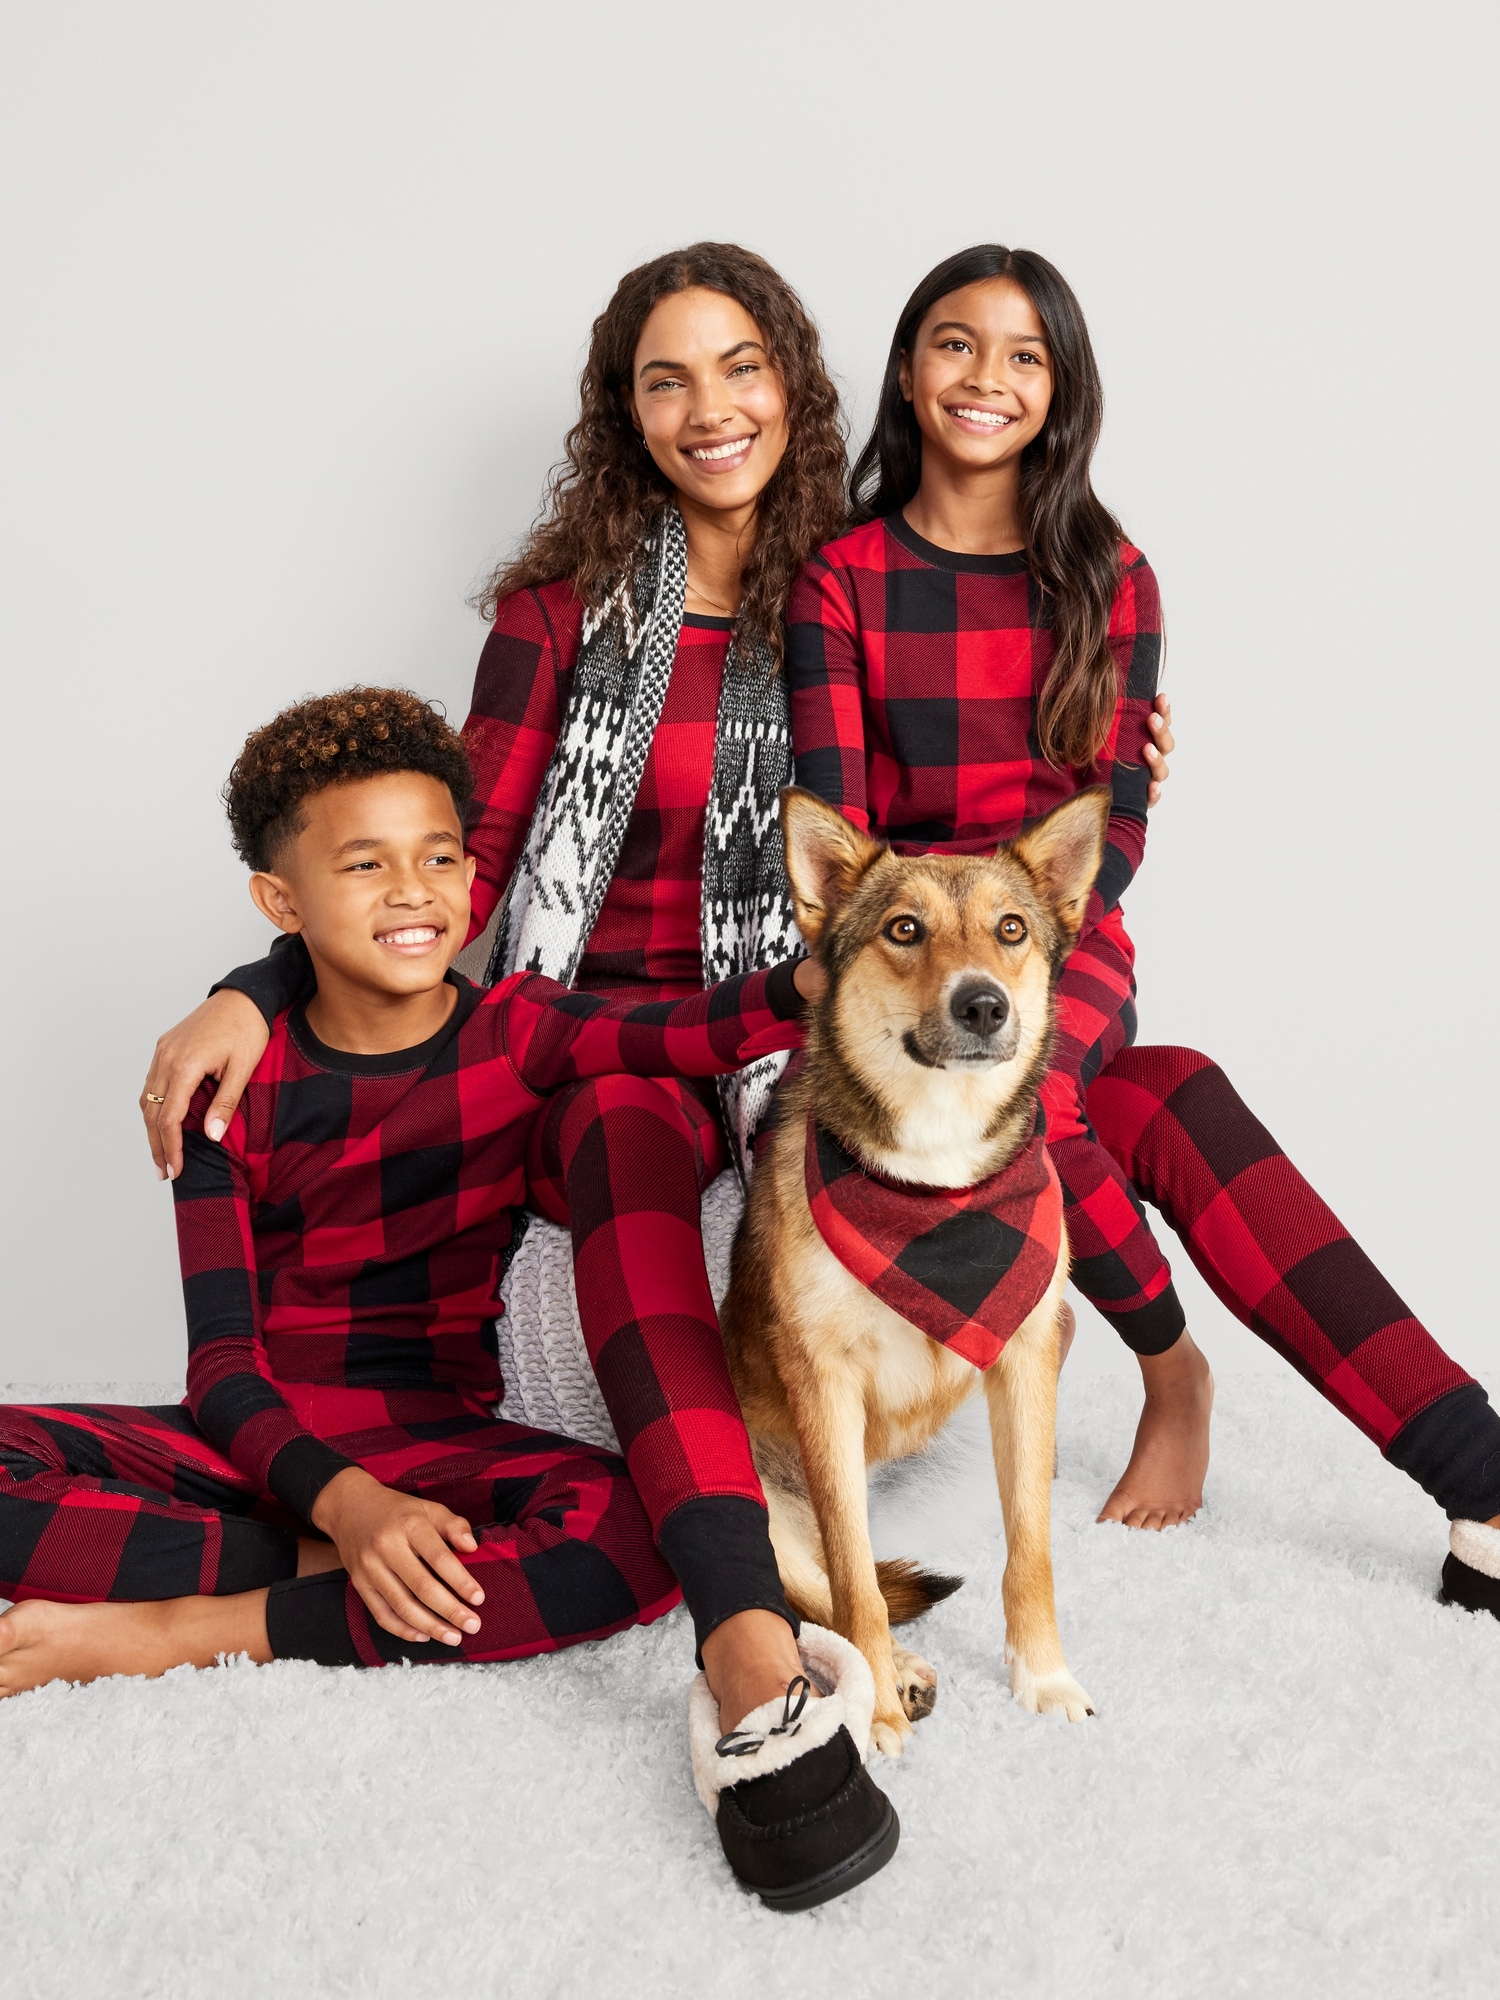 Old Navy Pajama Pants Just $7 Shipped (Regularly $20) - Includes